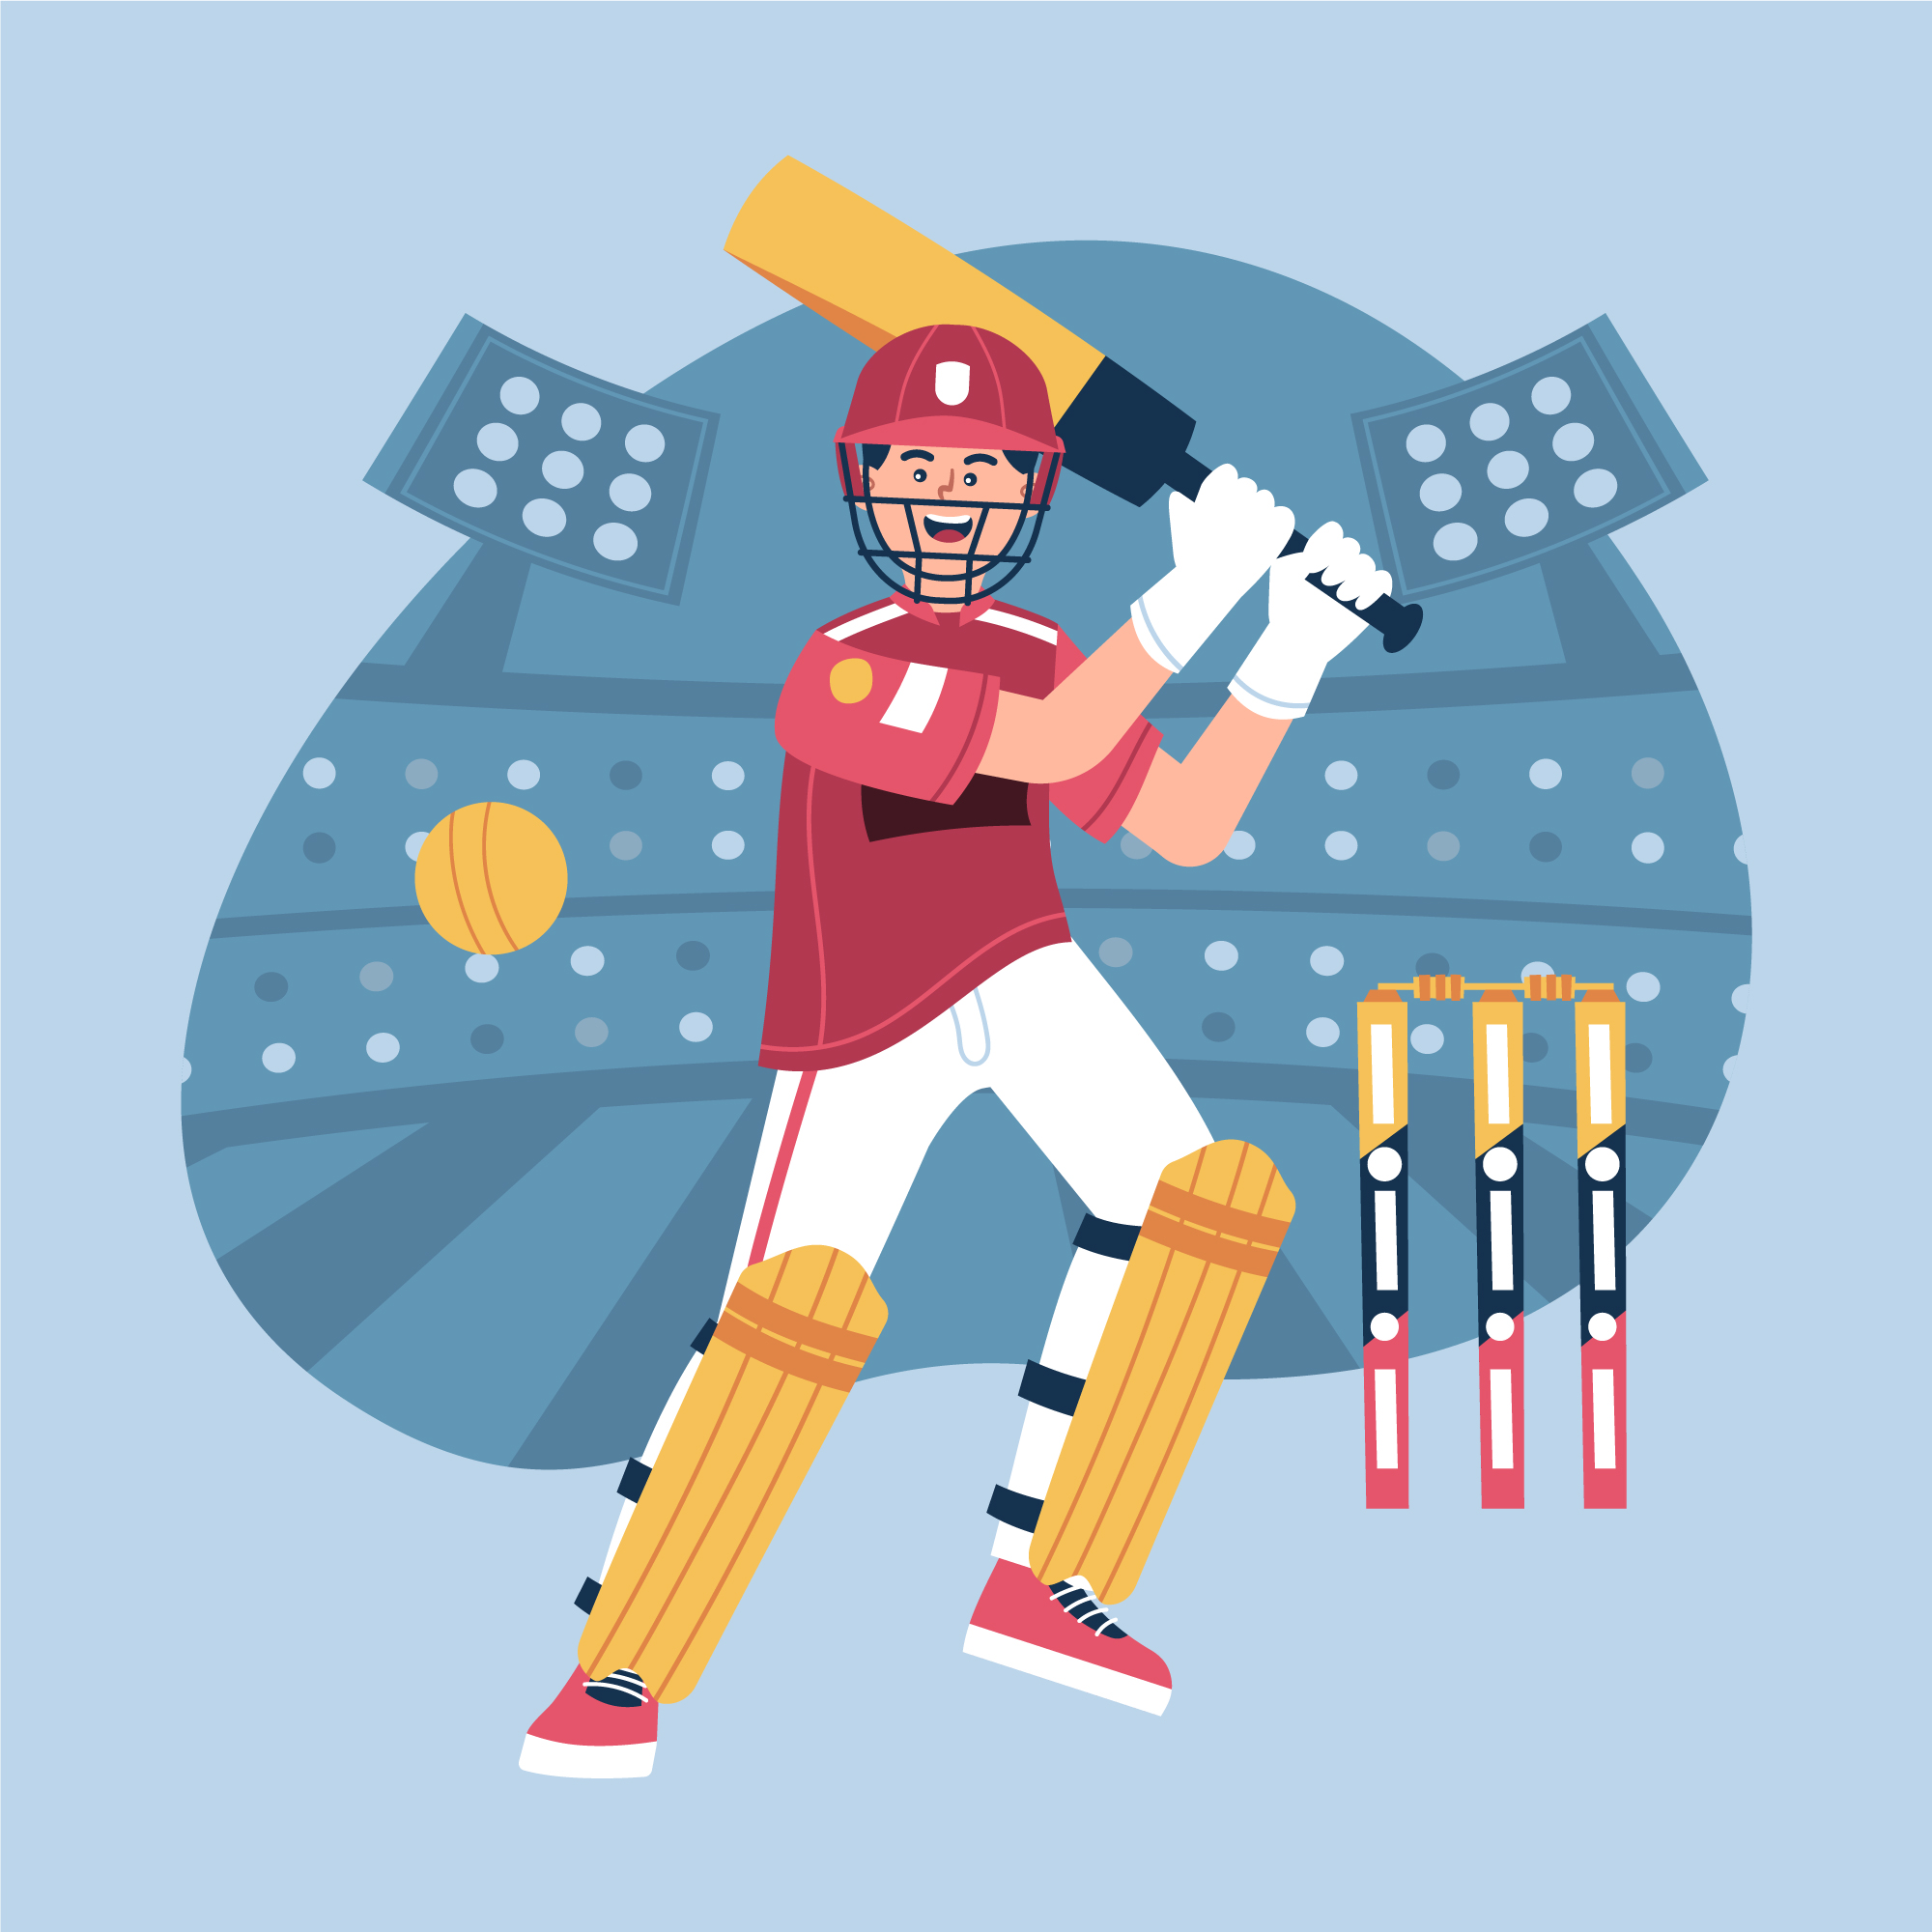 Get ready to host the next Cricket World Cup with these five <a href="https://www.msmunify.com/blogs/5-courses-to-study-sports-management-2024/">sports management</a> courses in 2024. Unlock the secrets of event organization and management for a successful tournament. <a href="https://www.msmunify.com/">Study abroad consultants</a> can help you find the right international programs in sports management. 